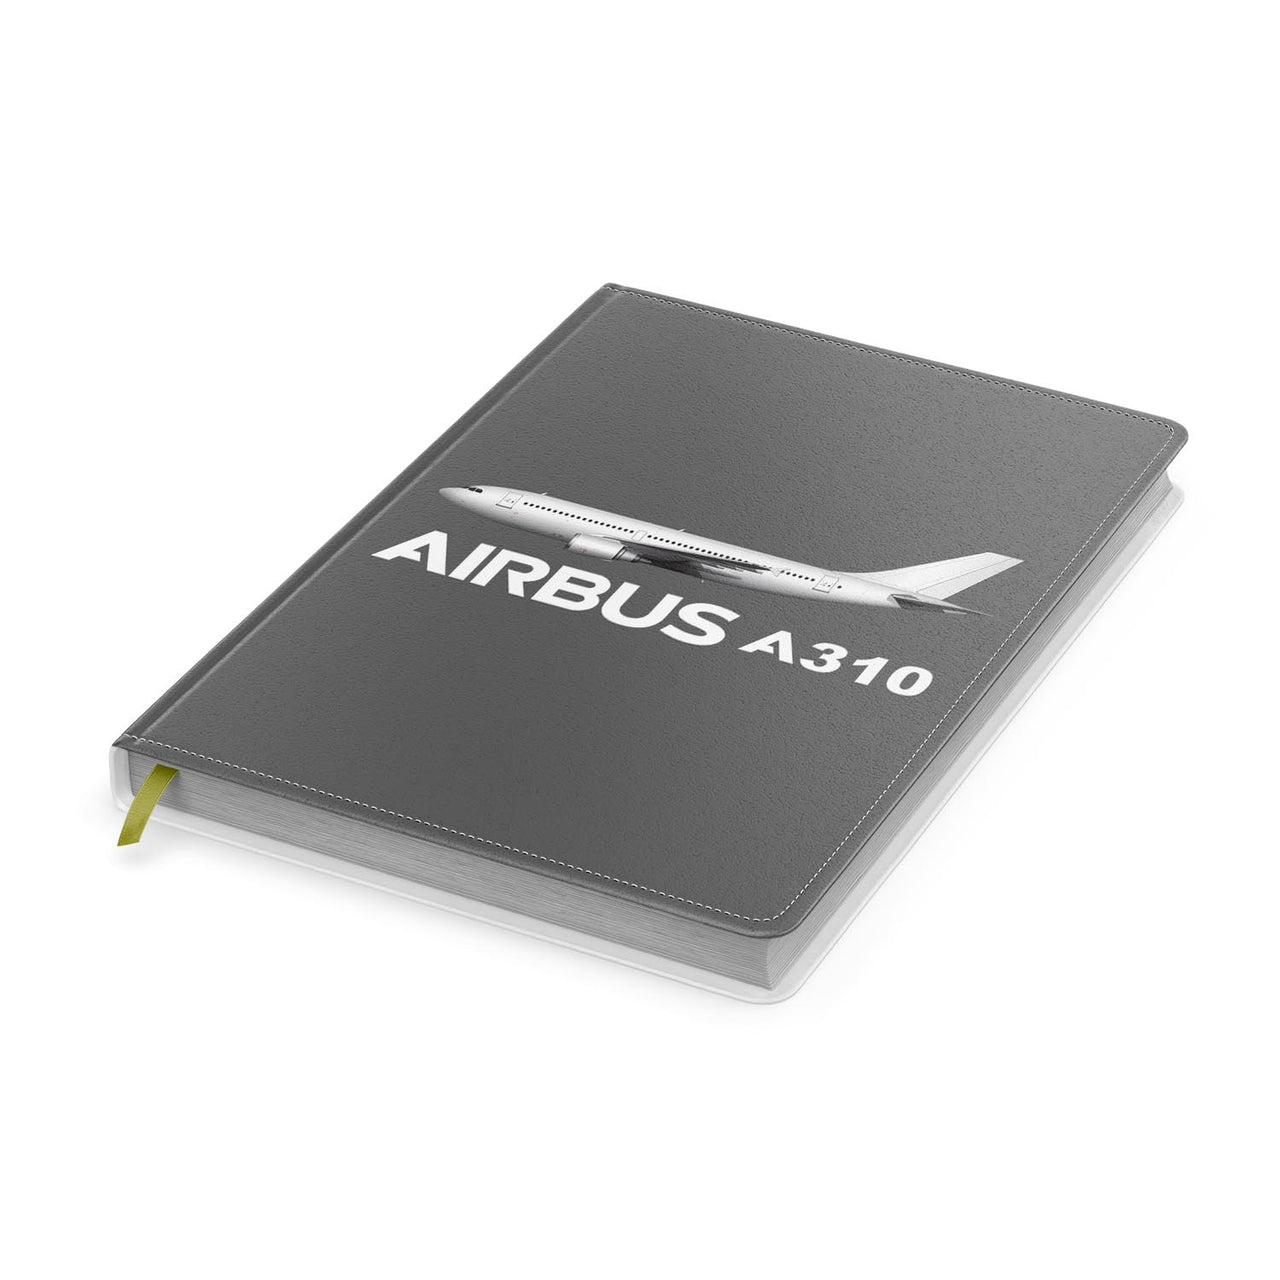 The Airbus A310 Designed Notebooks